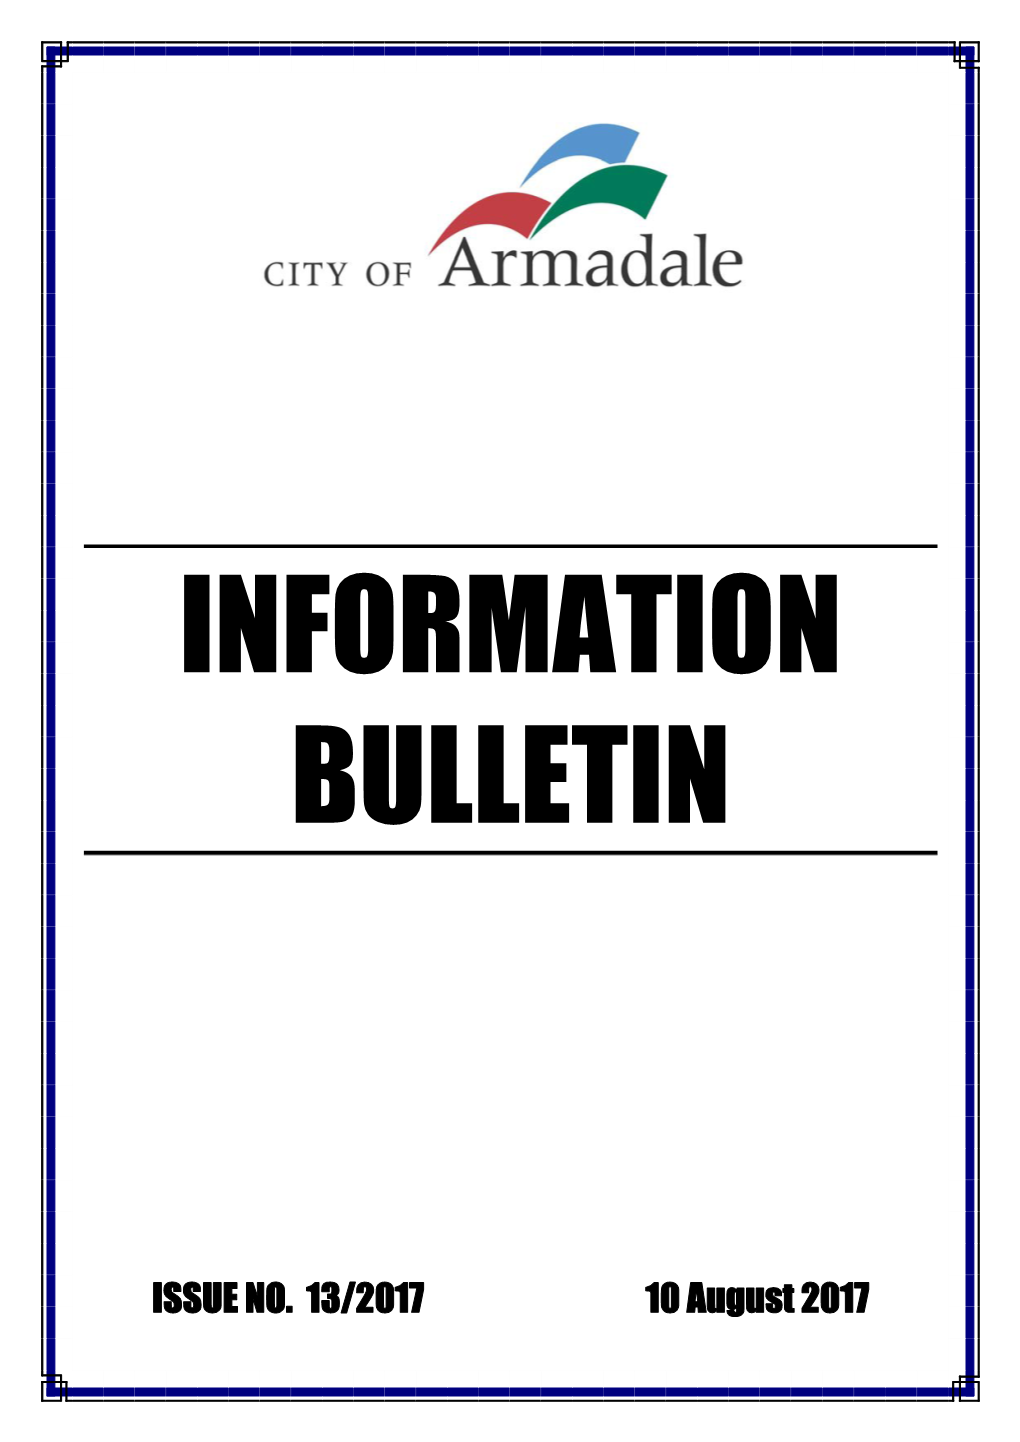 Issue No. 13/2017 Bulletin